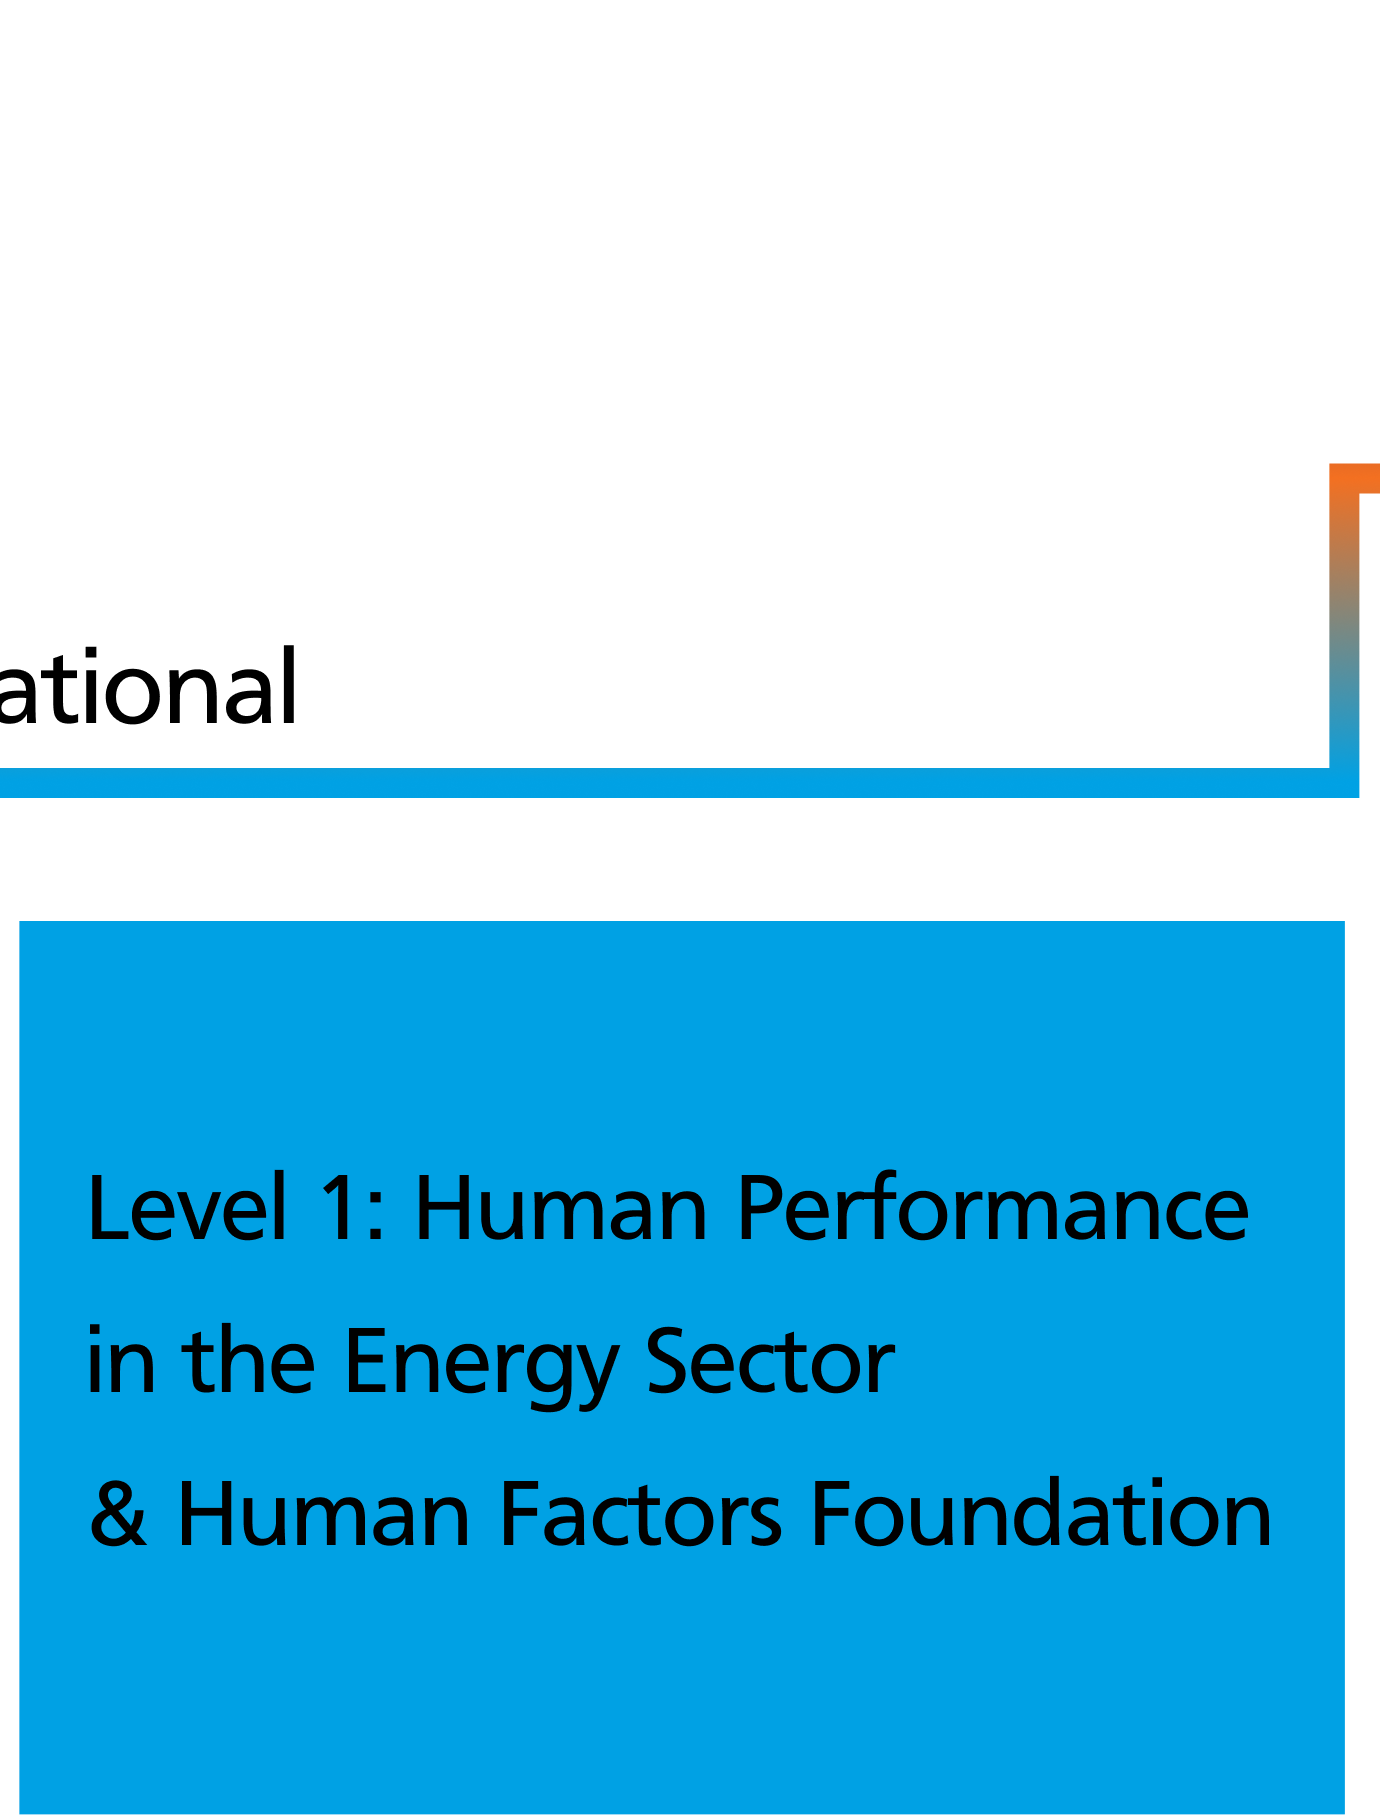 Level 1: Human Performance in the Energy Sector & Human Factors Foundation